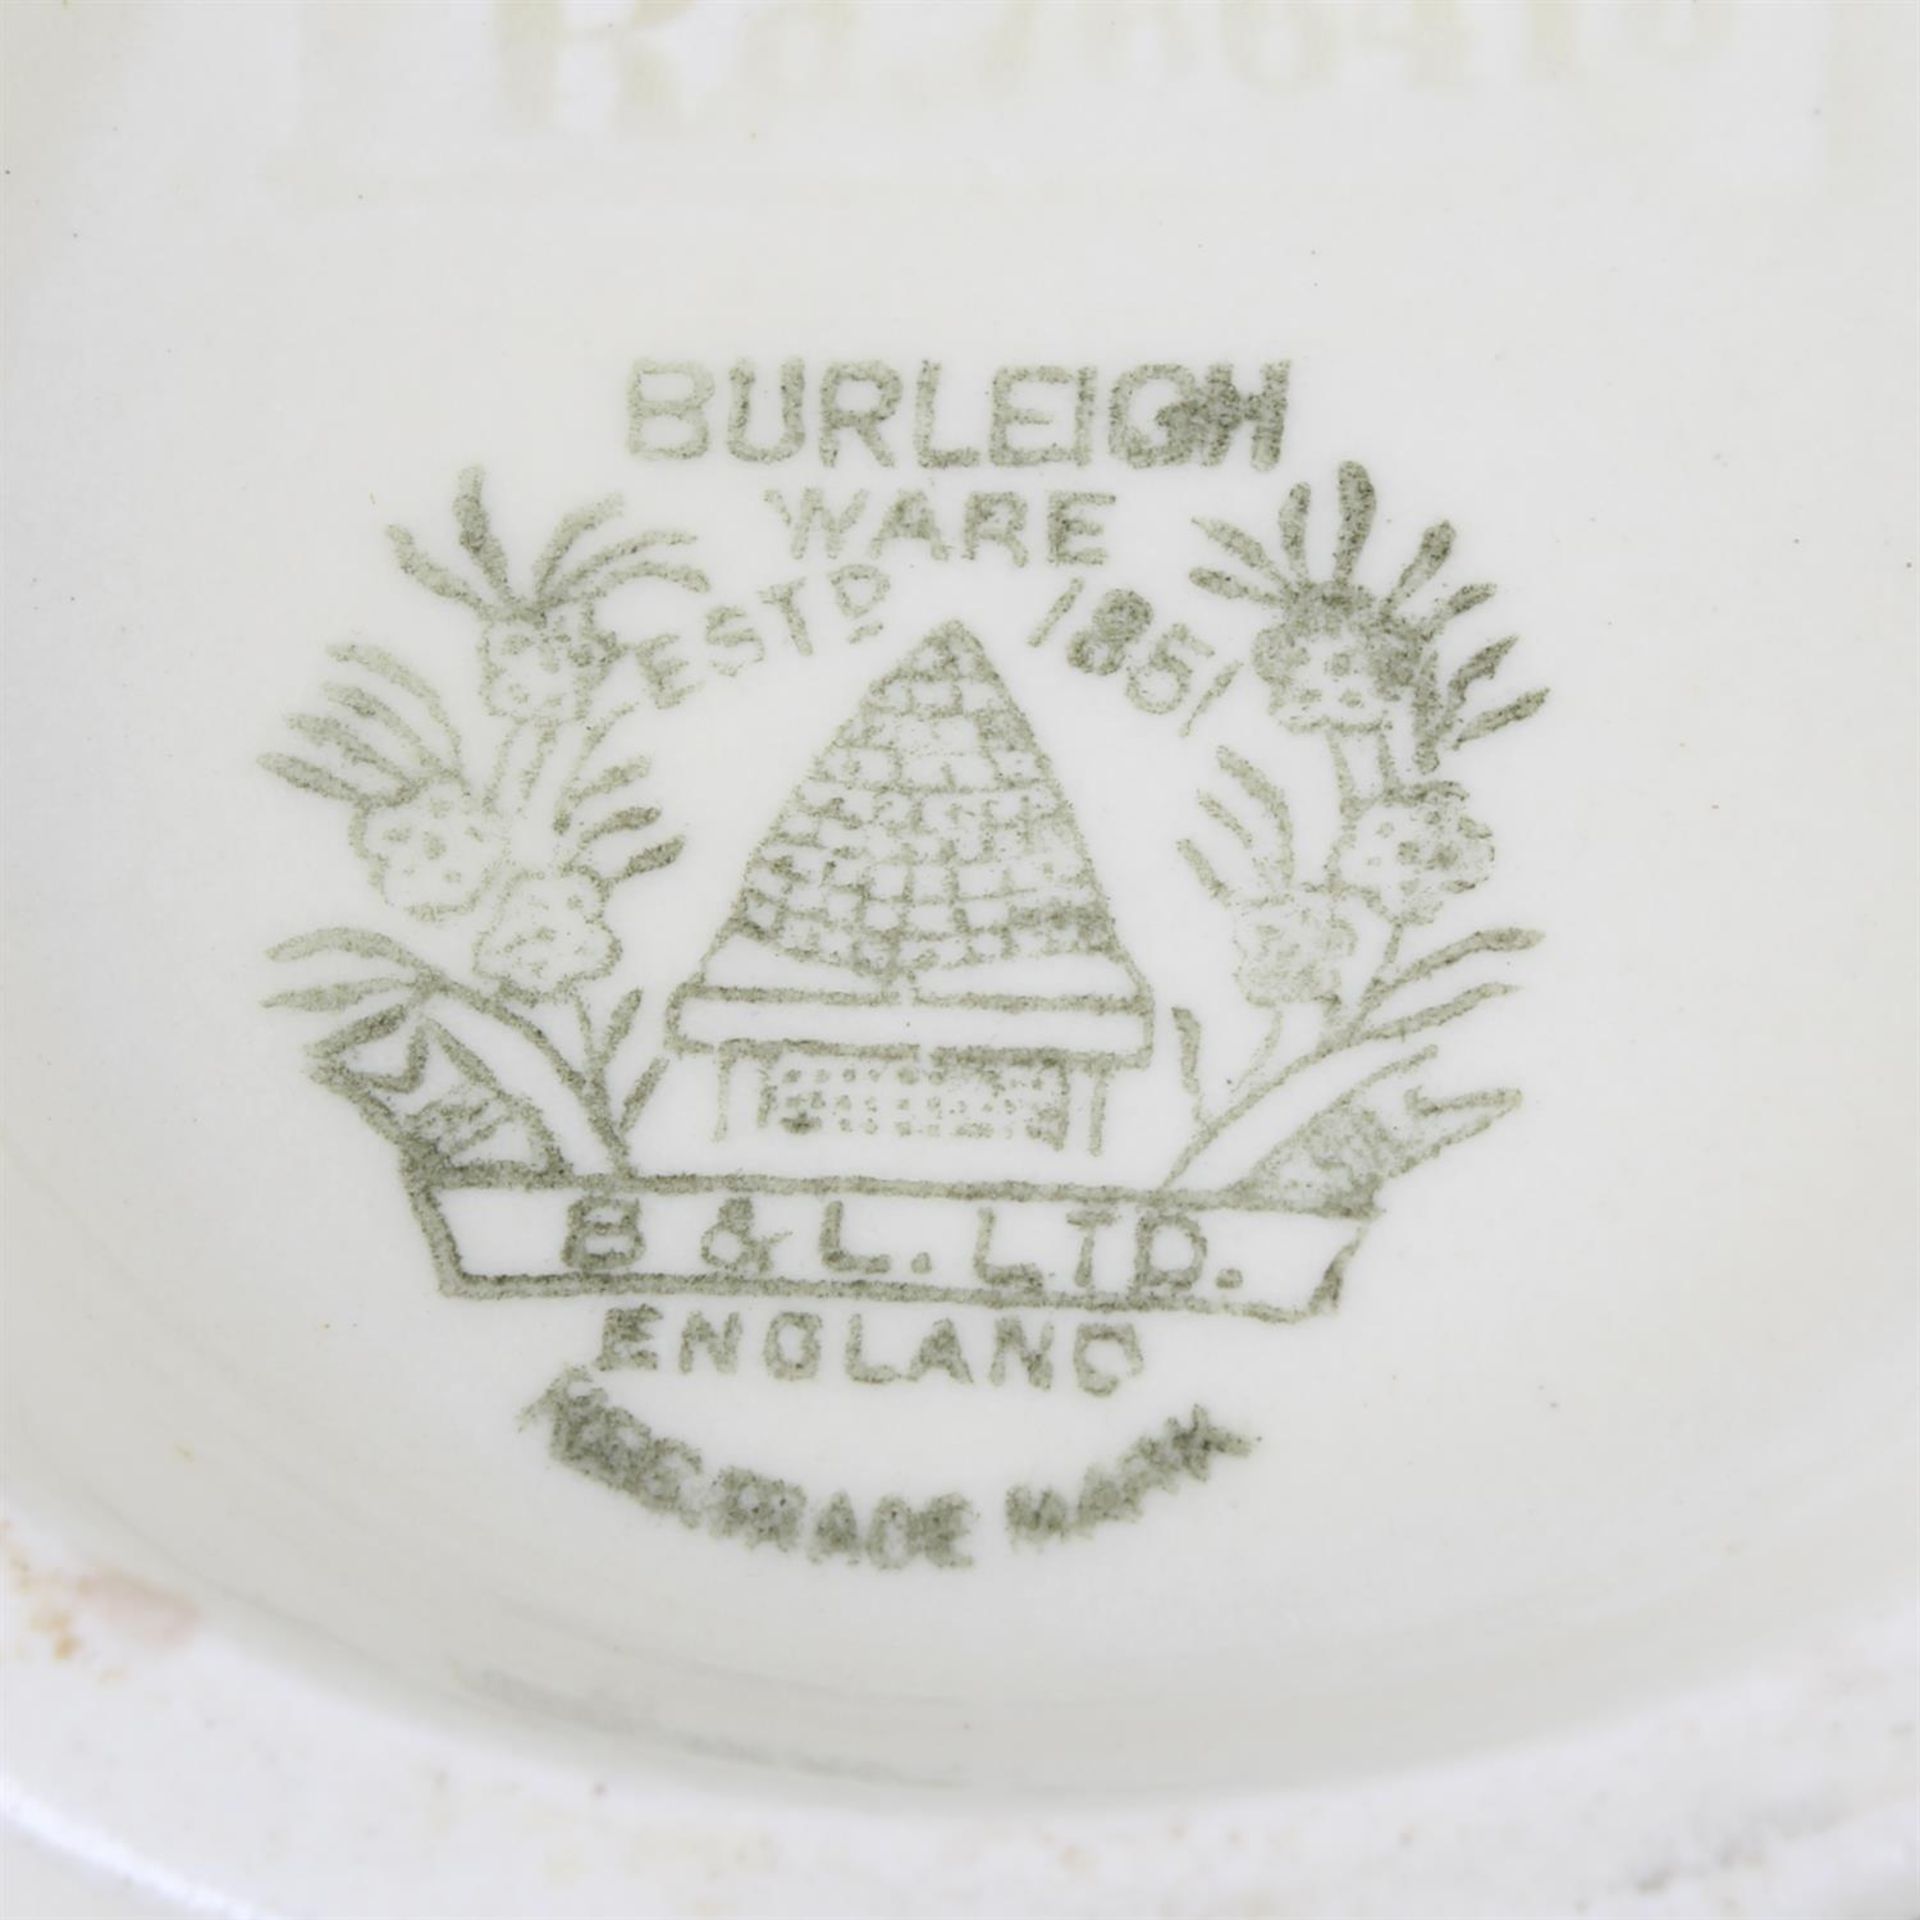 Assorted Crown Ducal Sunburst and Burleigh Ware Meadowland tea and dinner wares - Image 6 of 6